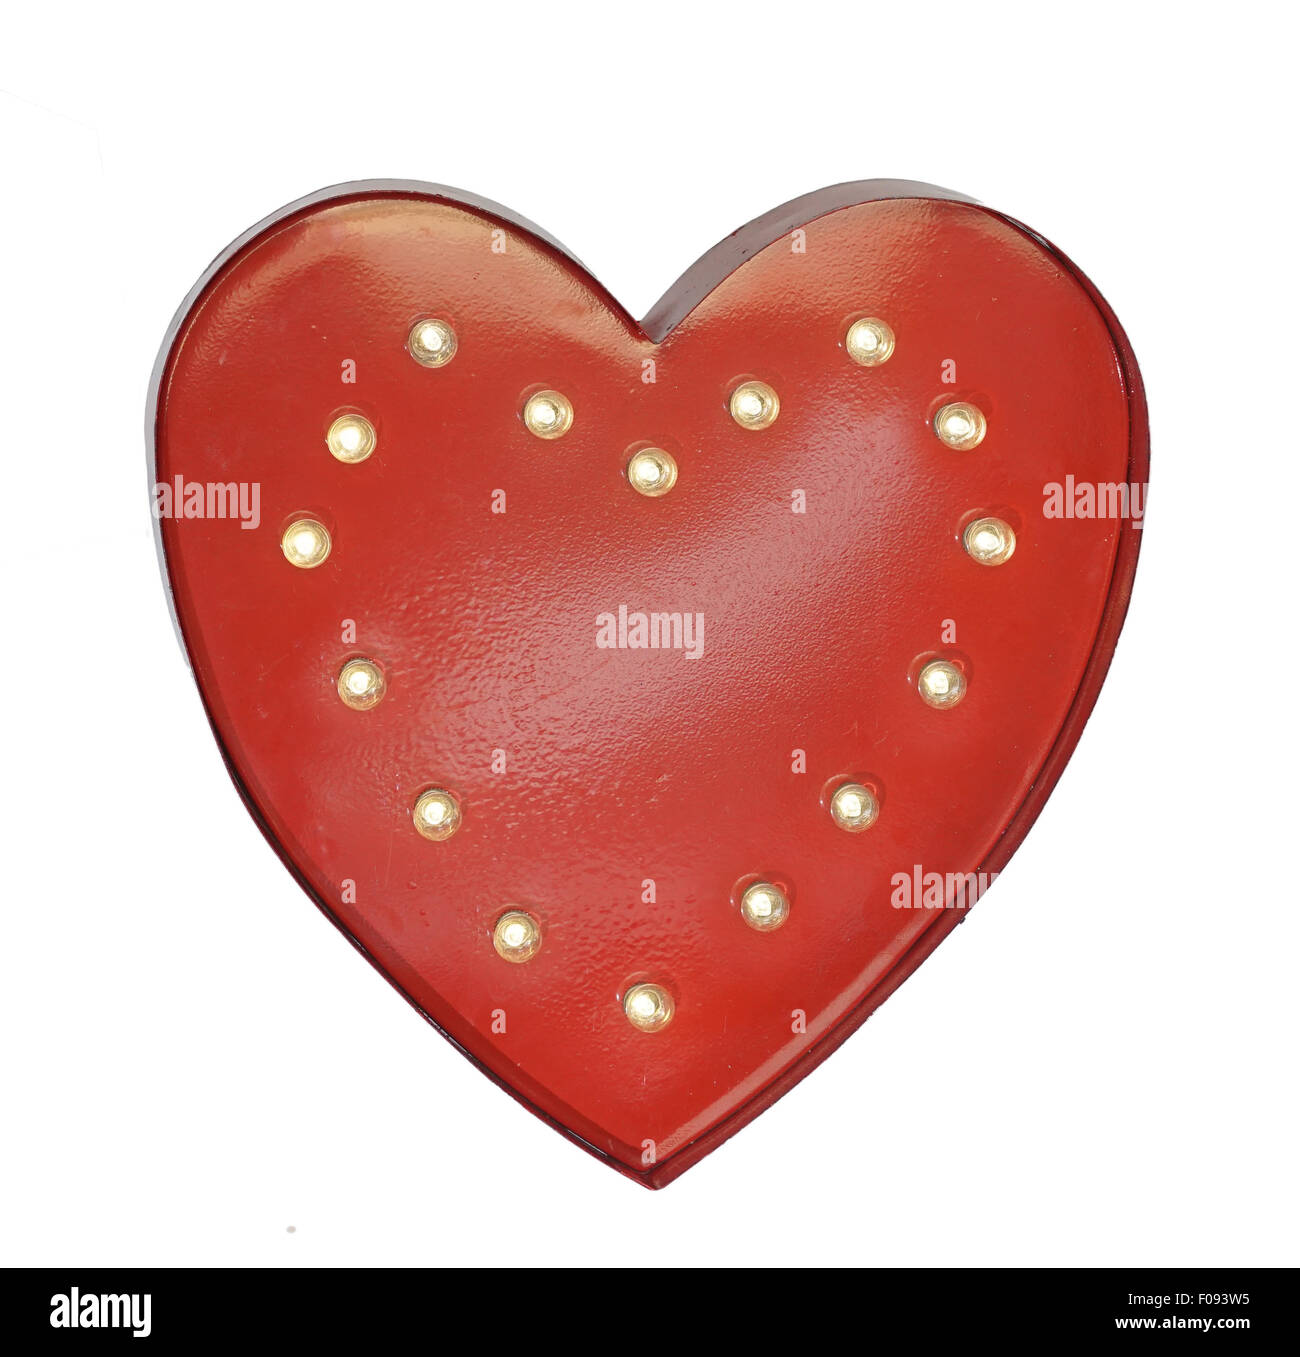 Red heart shape, symbol of love Stock Photo